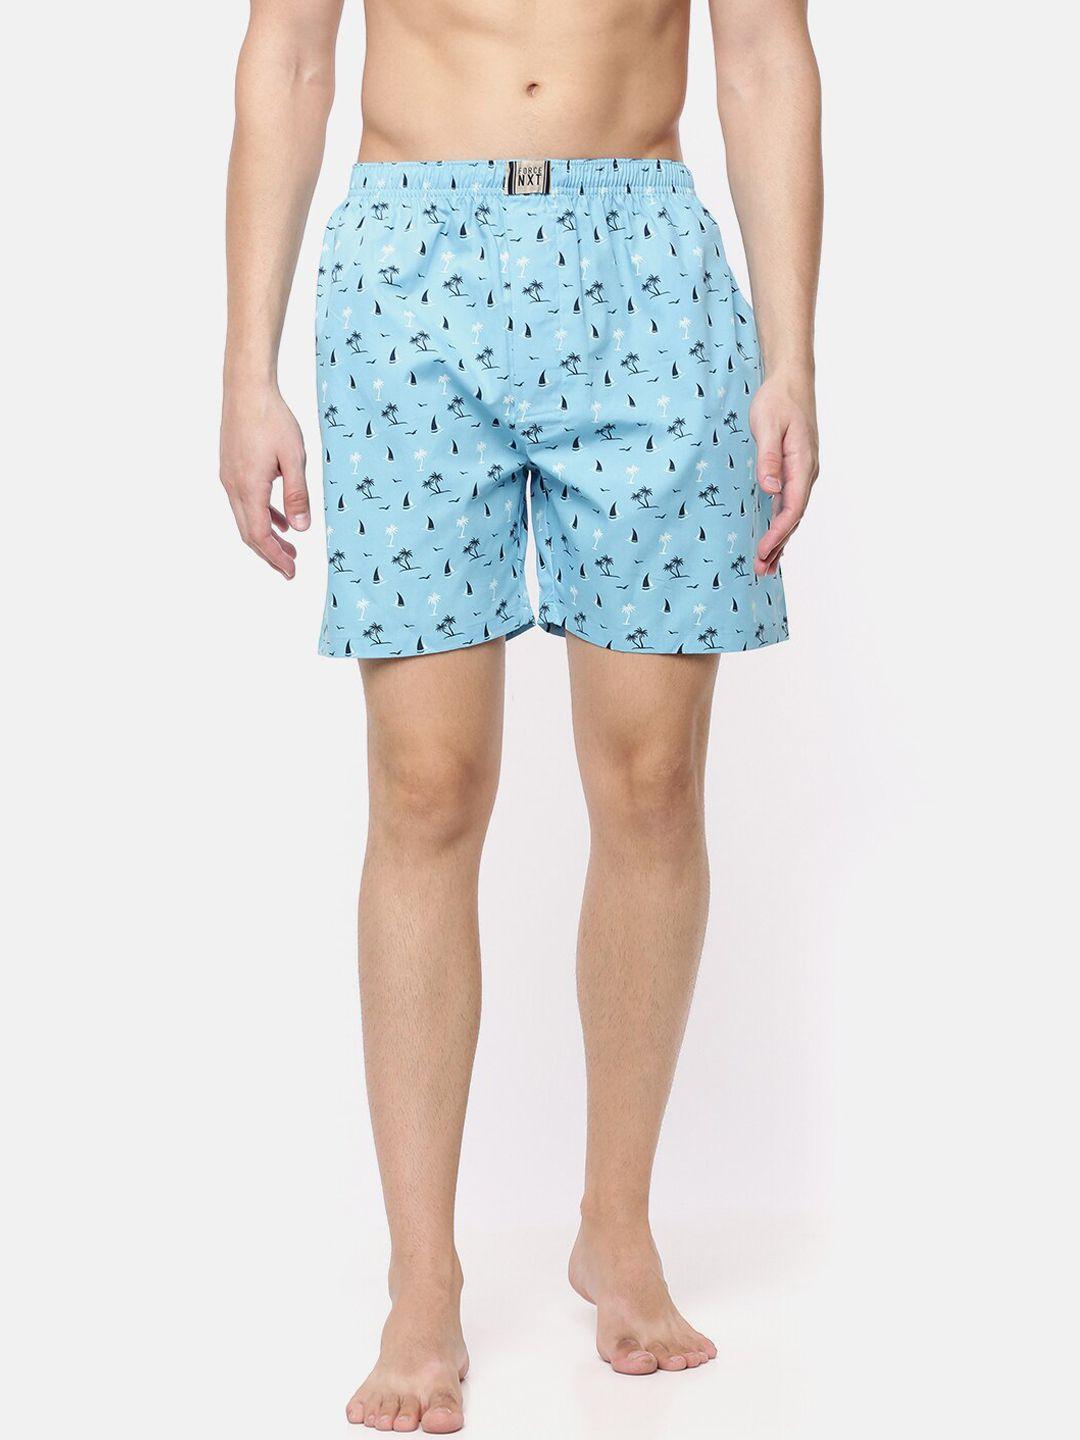 force-nxt-men-turquoise-blue-&-white-printed-pure-cotton-boxers